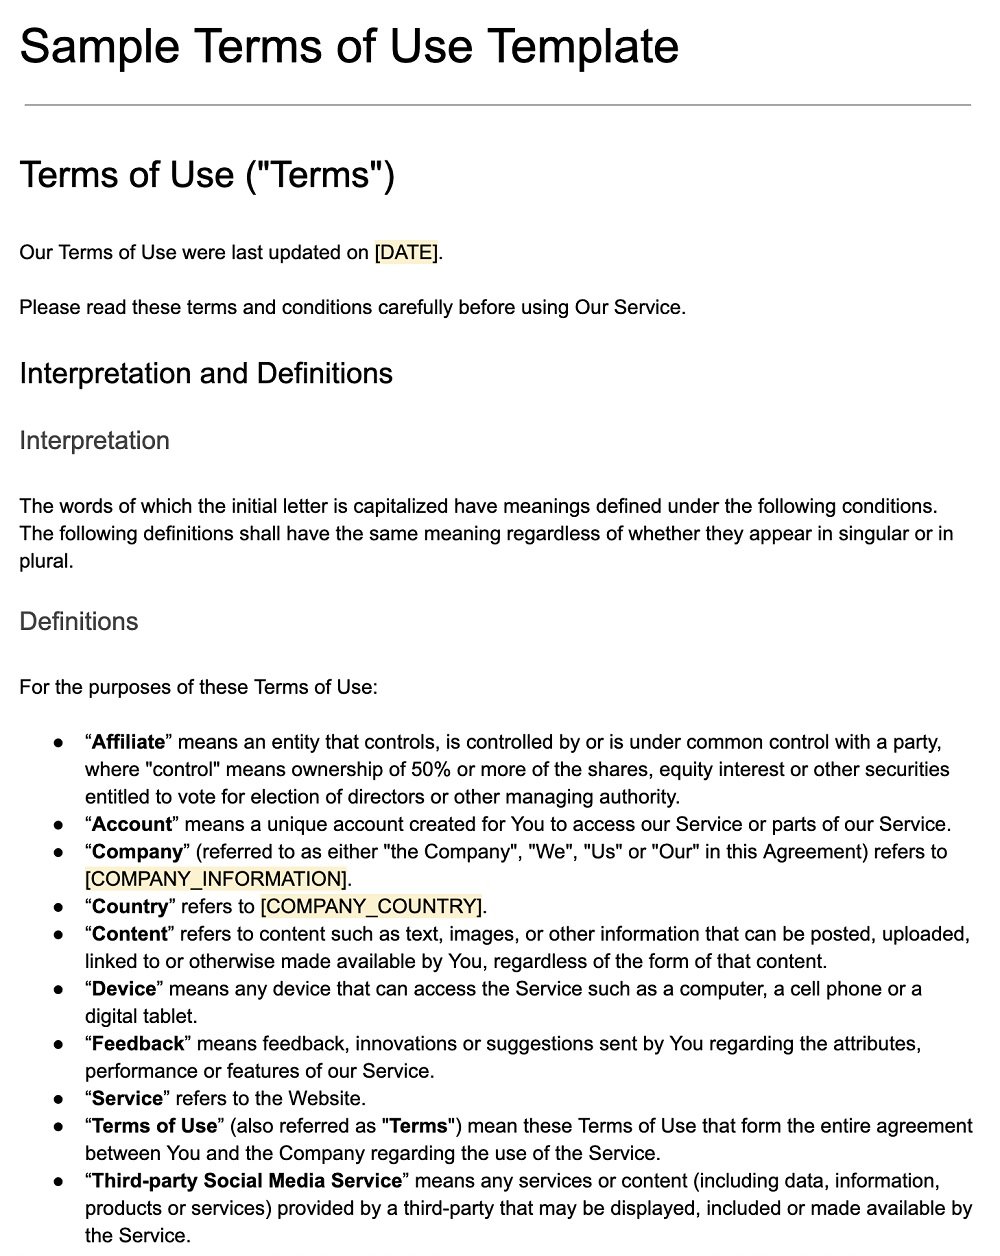 Screenshot of the Sample Terms of Use Template